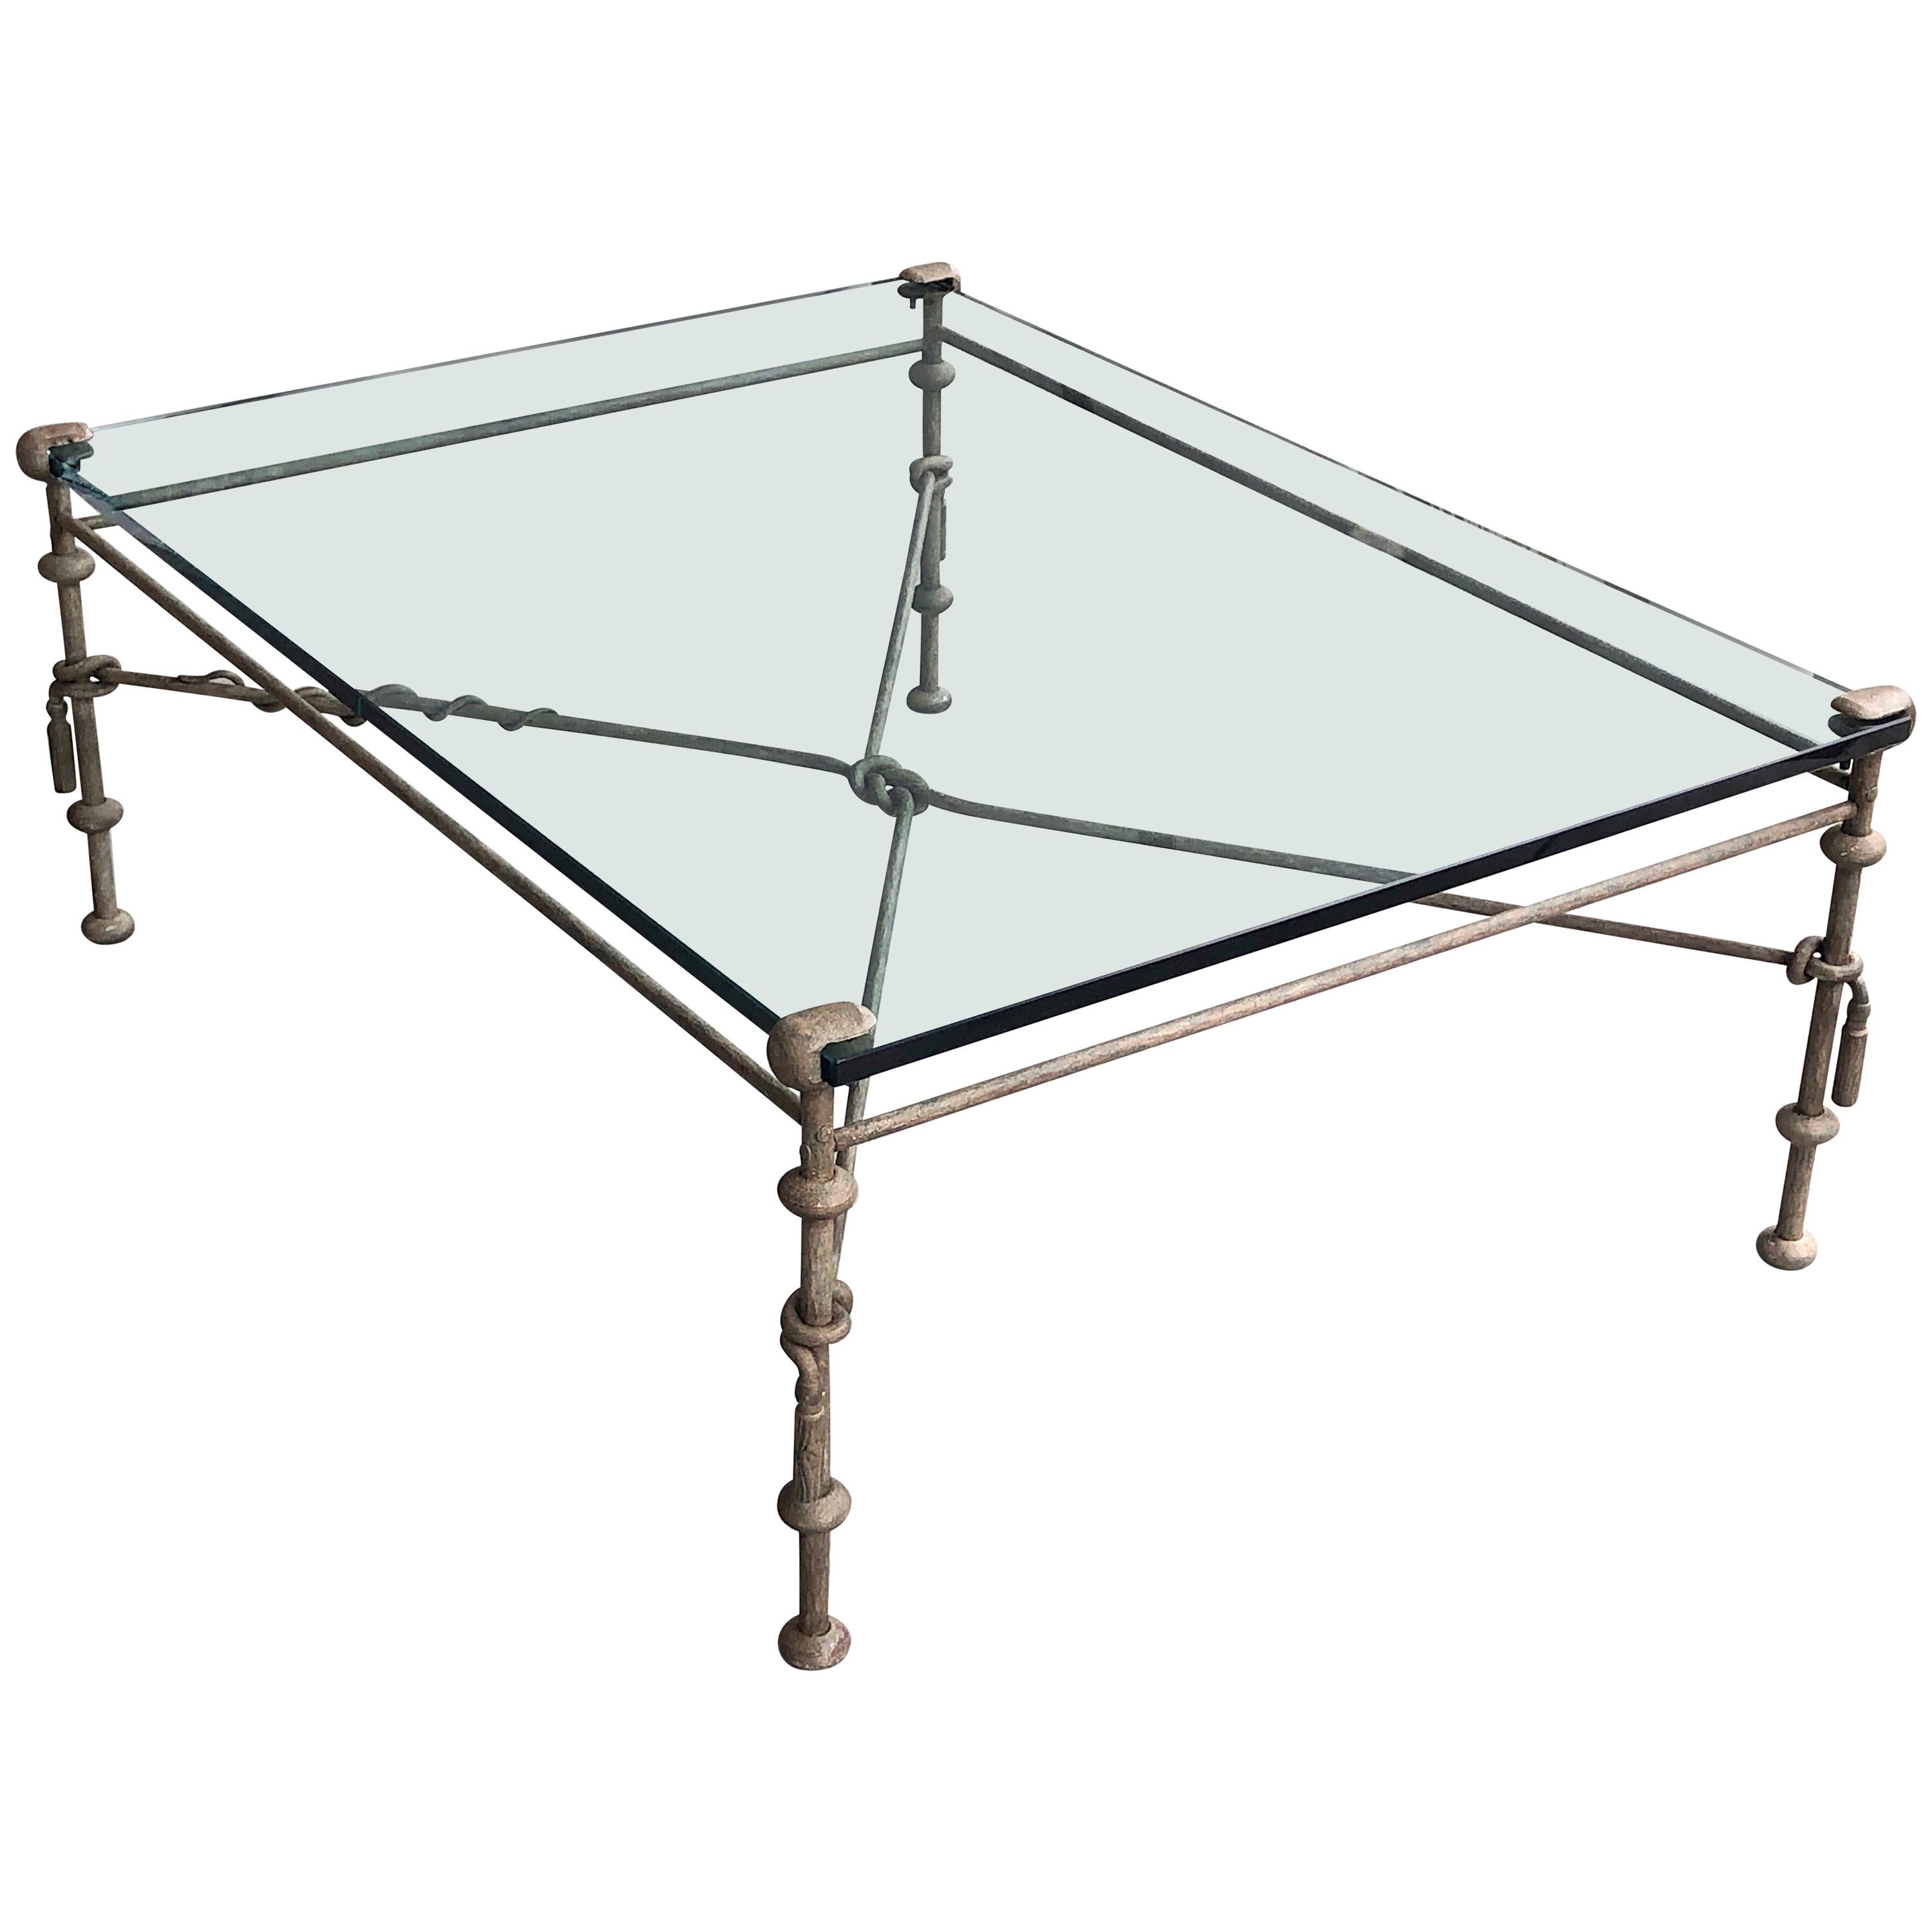 A beautifully crafted coffee table. Patinated steel frame with a 3/4